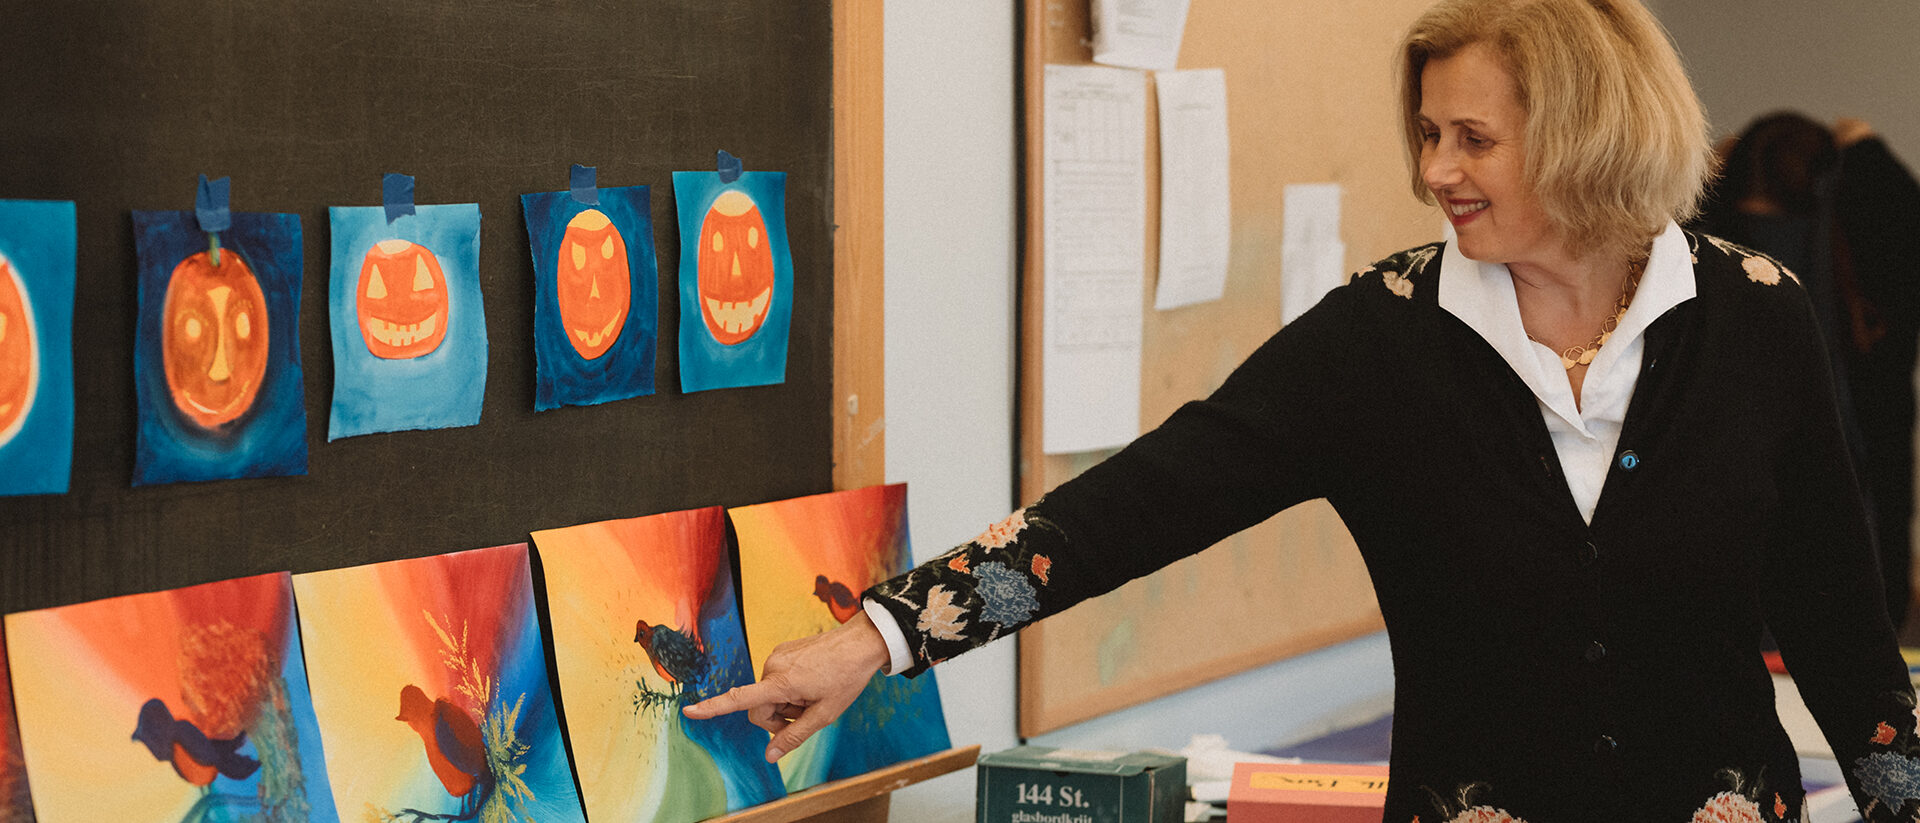 Painting instructor Martina Muller standing at chalkboard where student work is displayed pointing to one of the colorful paintings of a bird